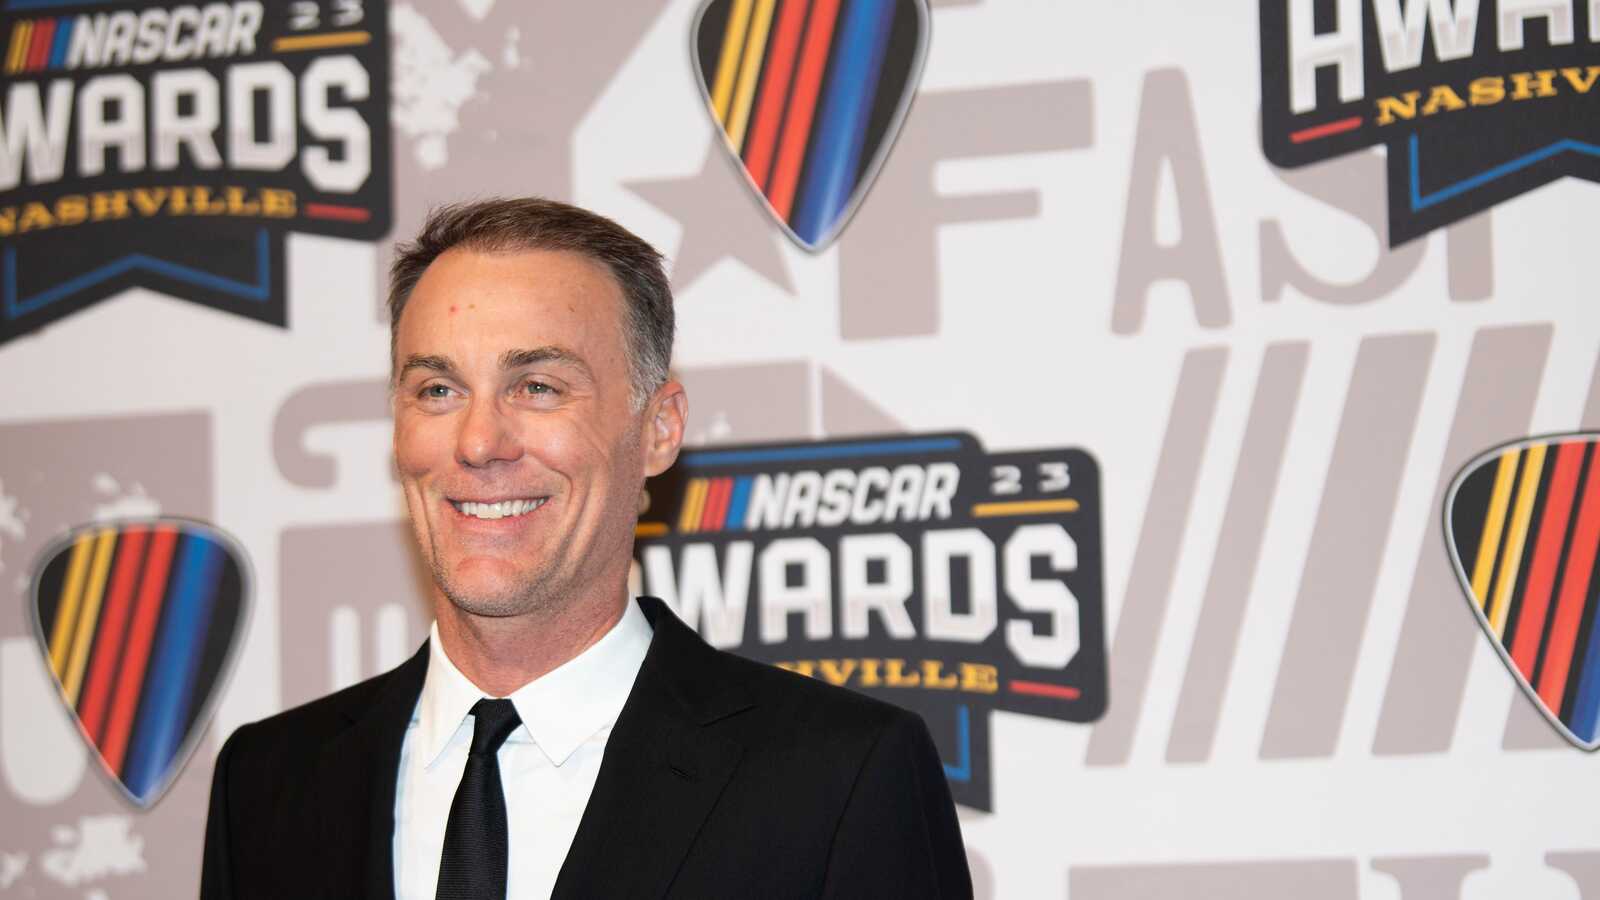 Kevin Harvick breaks down the difference between 'naturally gifted' Kyle Larson and 'hard working' William Byron